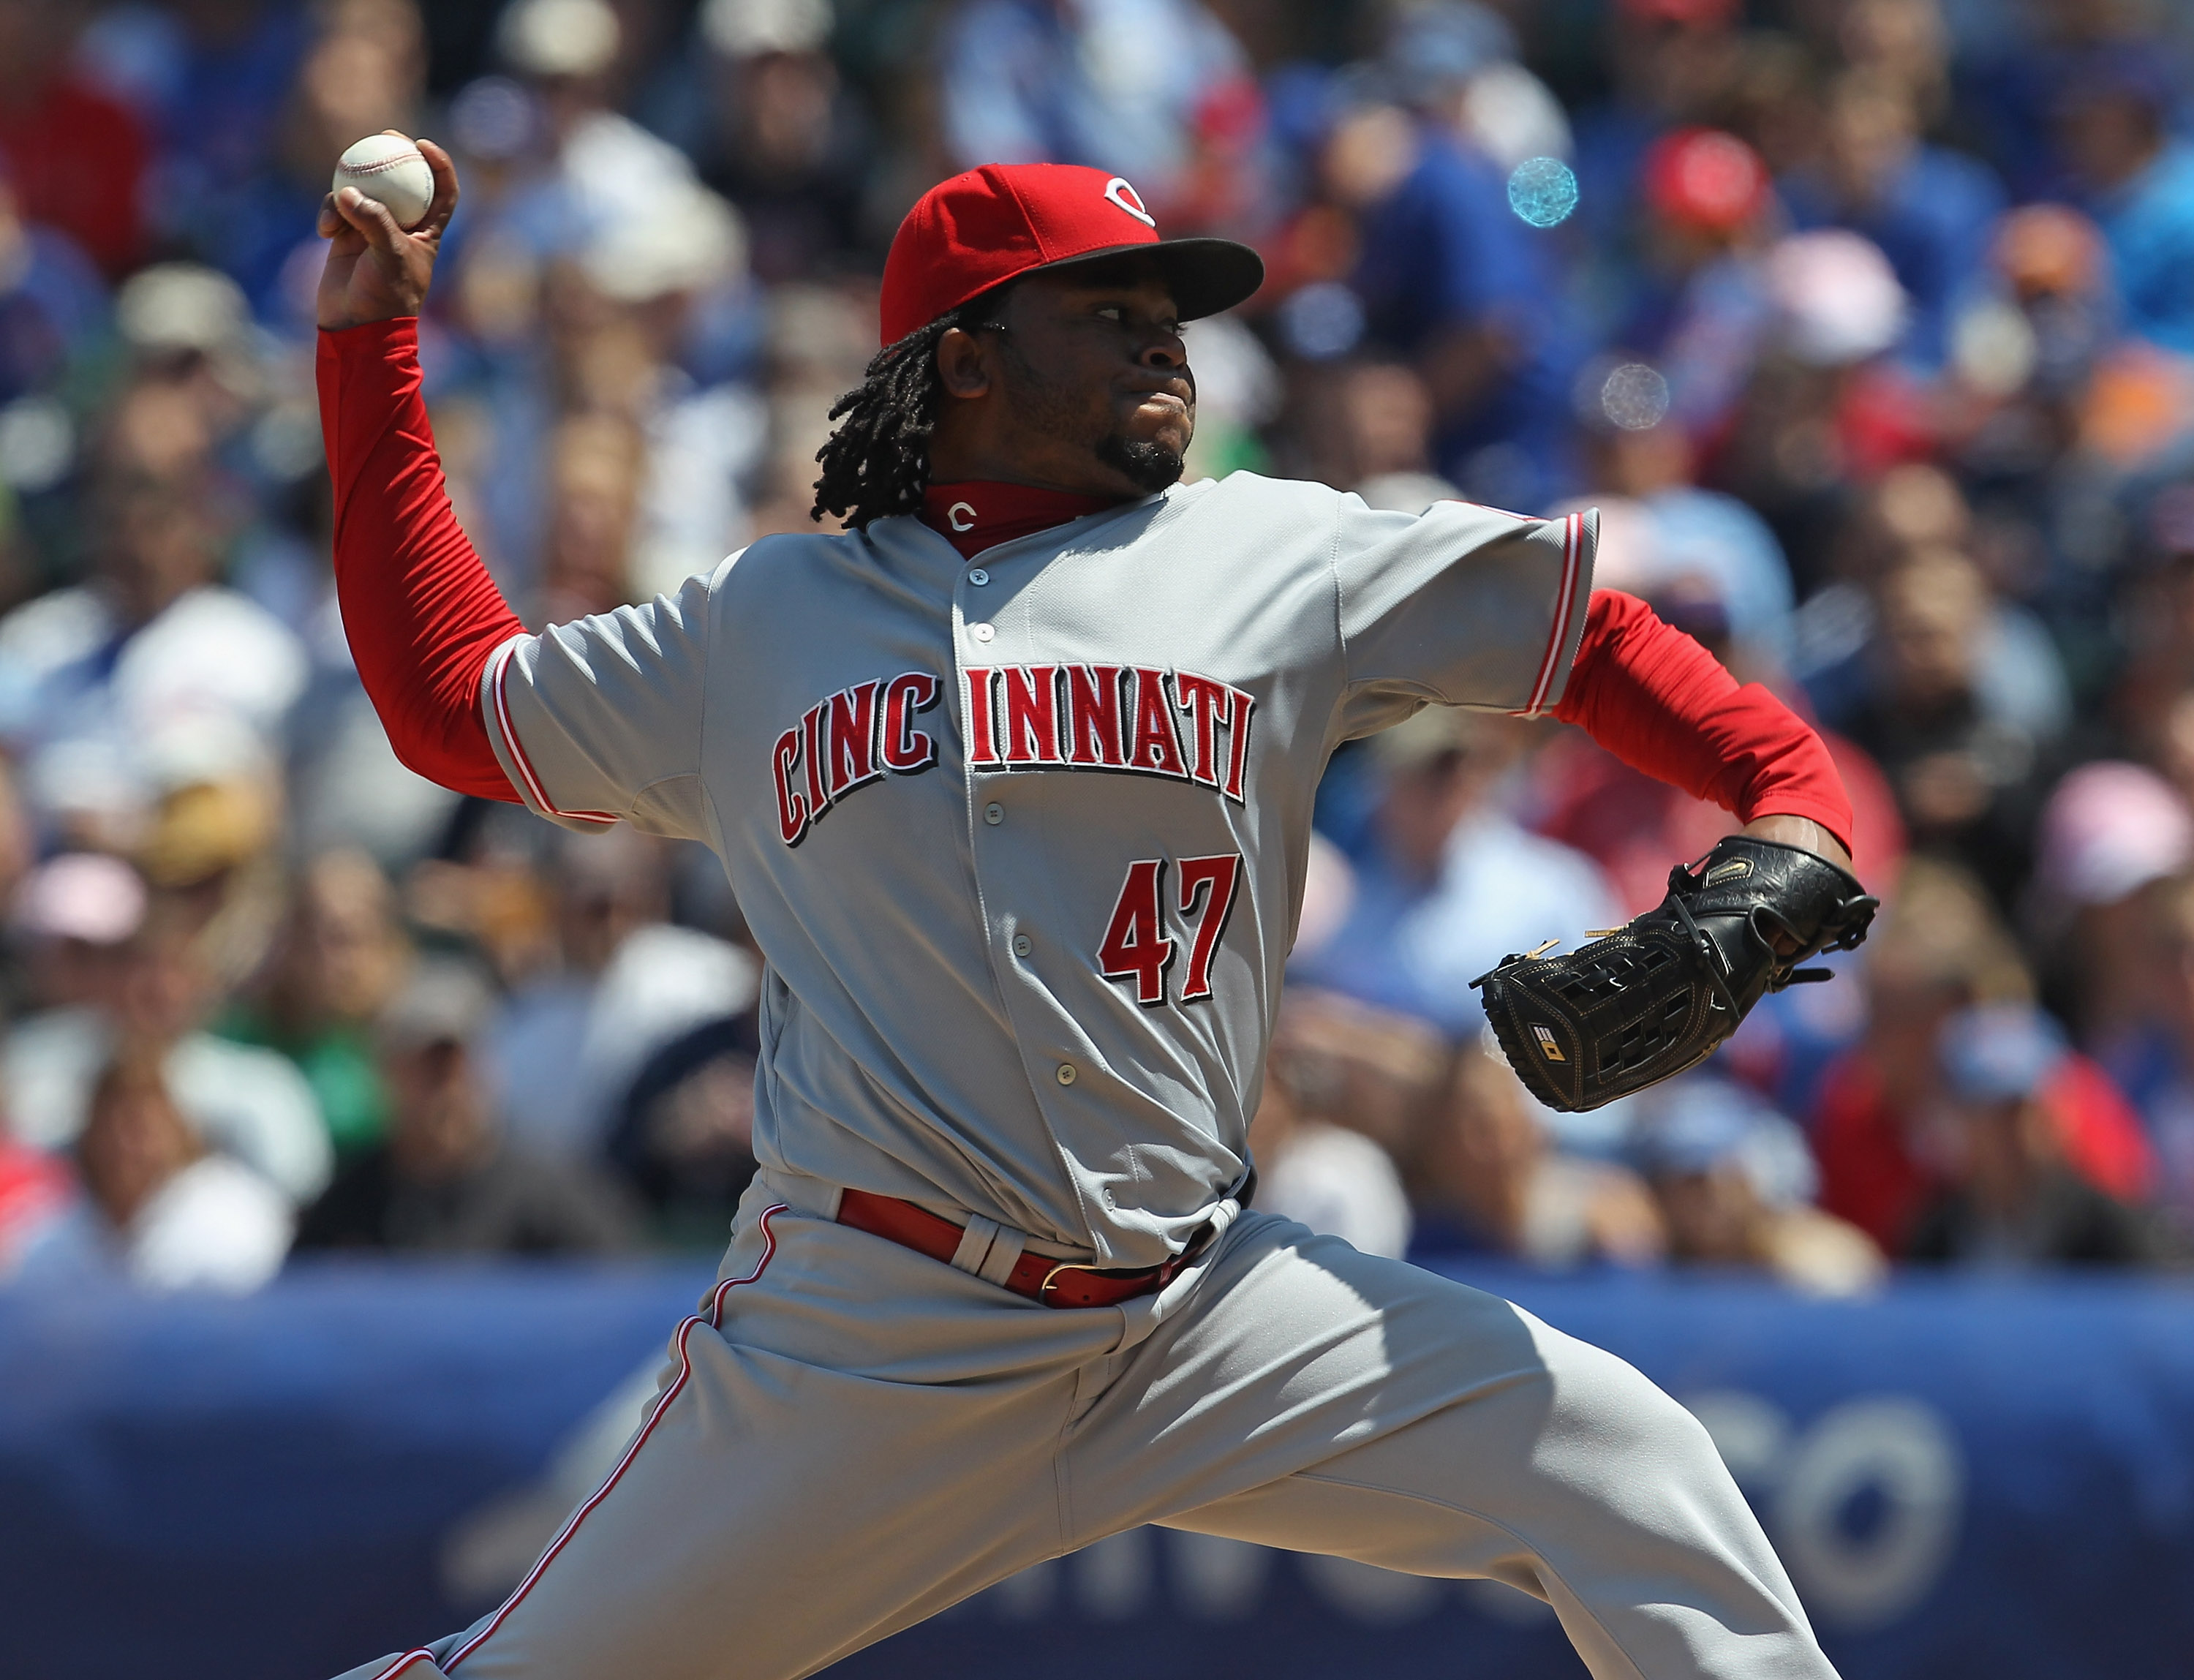 Johnny Cueto's return has helped the Reds in a big way.